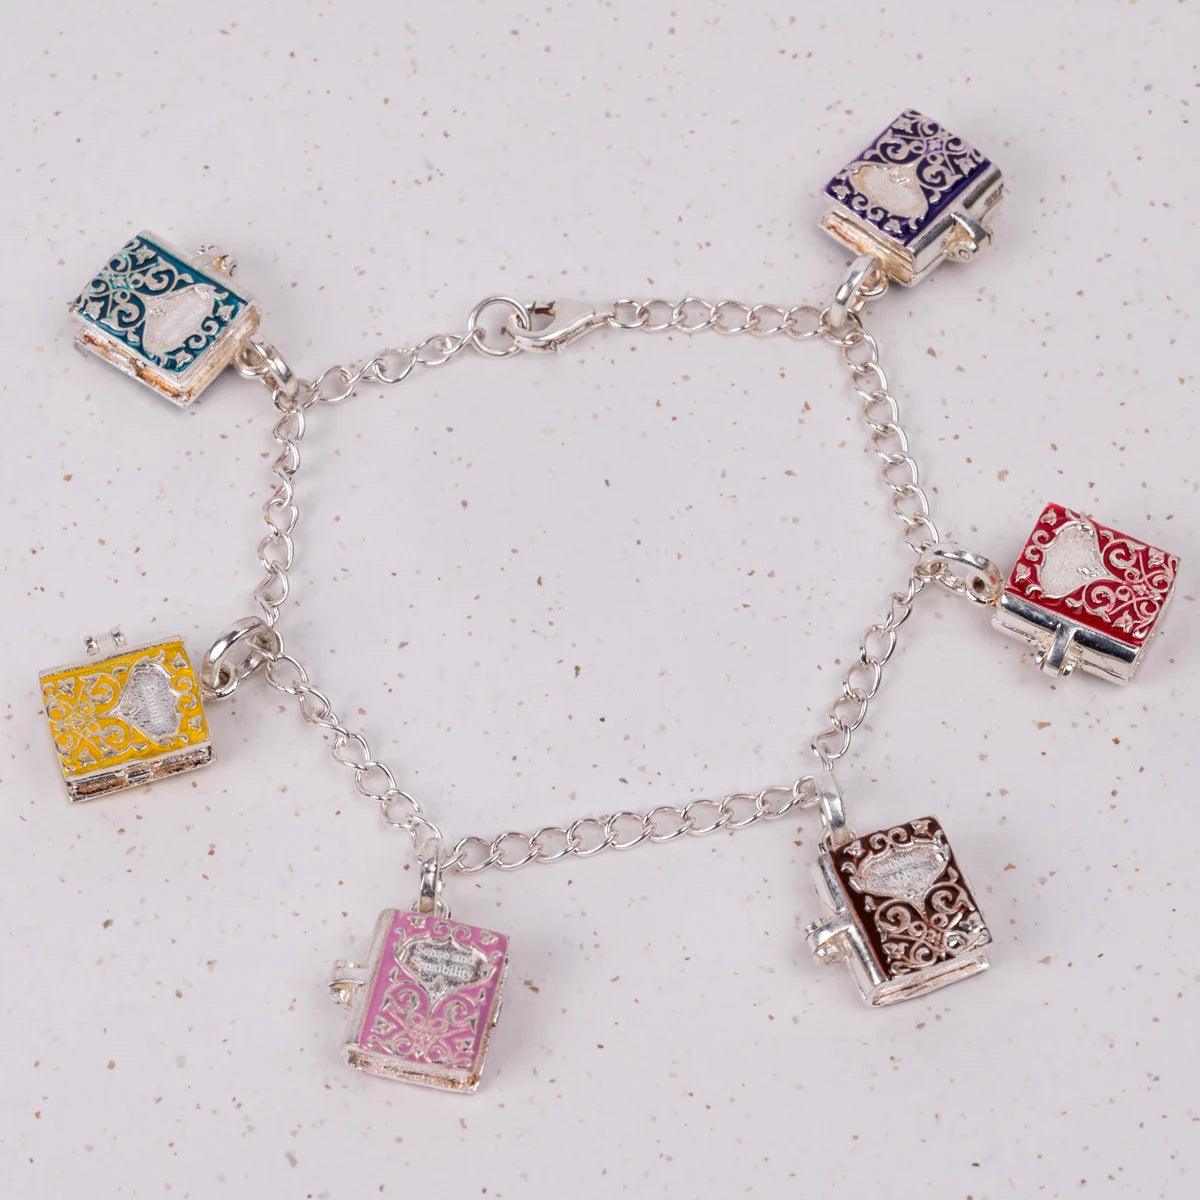 Jane Austen Six Sterling Silver and Email -romans Charm Bracelet | Exclusieve verzameling